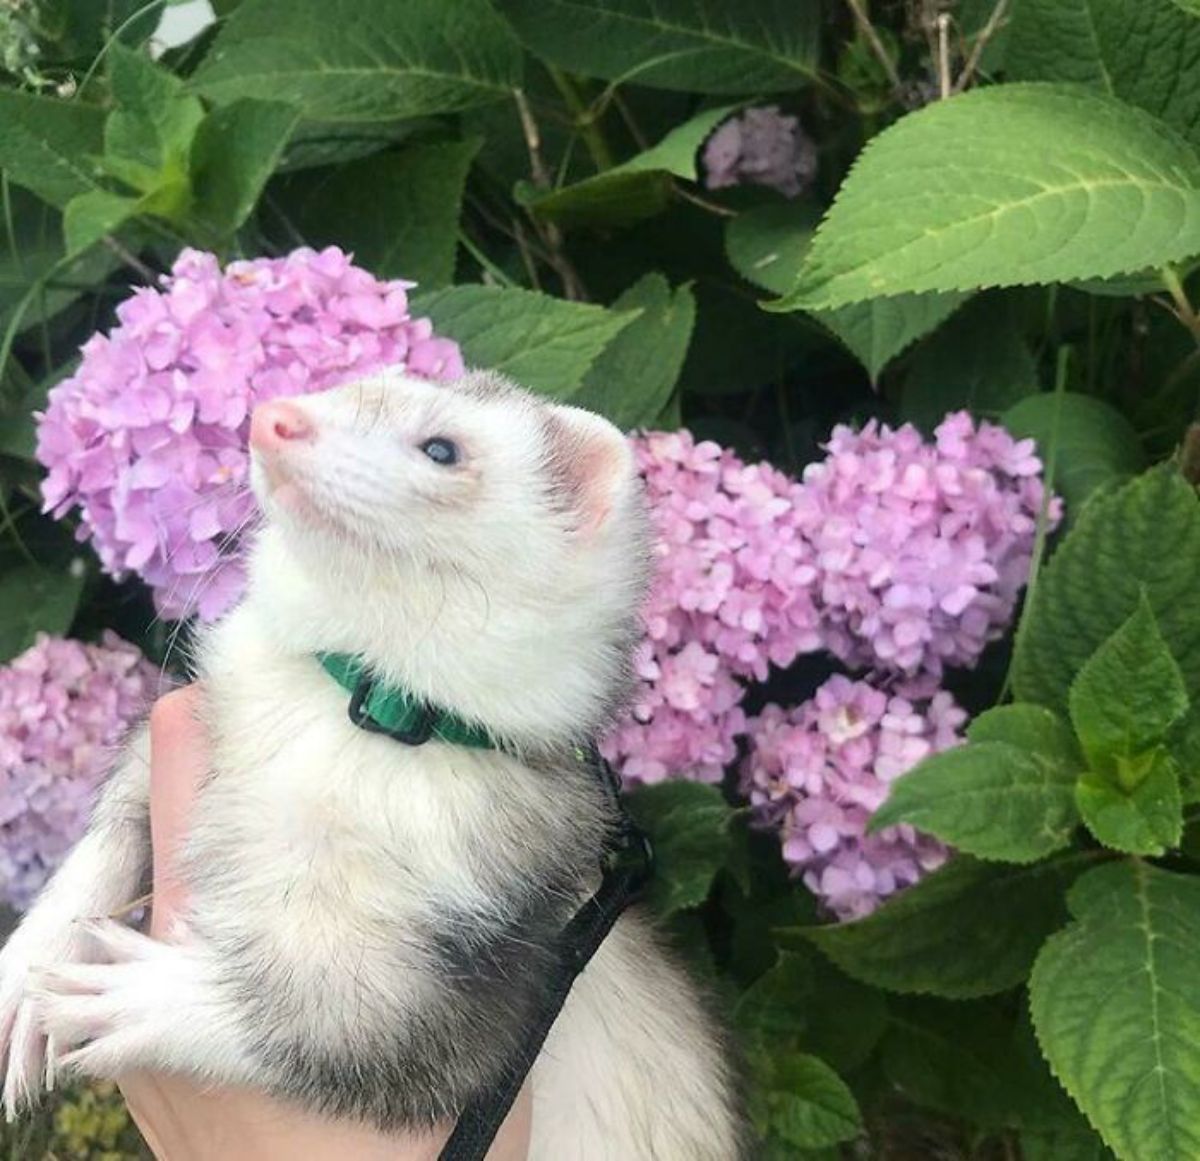 grey and white ferret in a green collar and black harness and leash being held up next to purple flowers on a bush